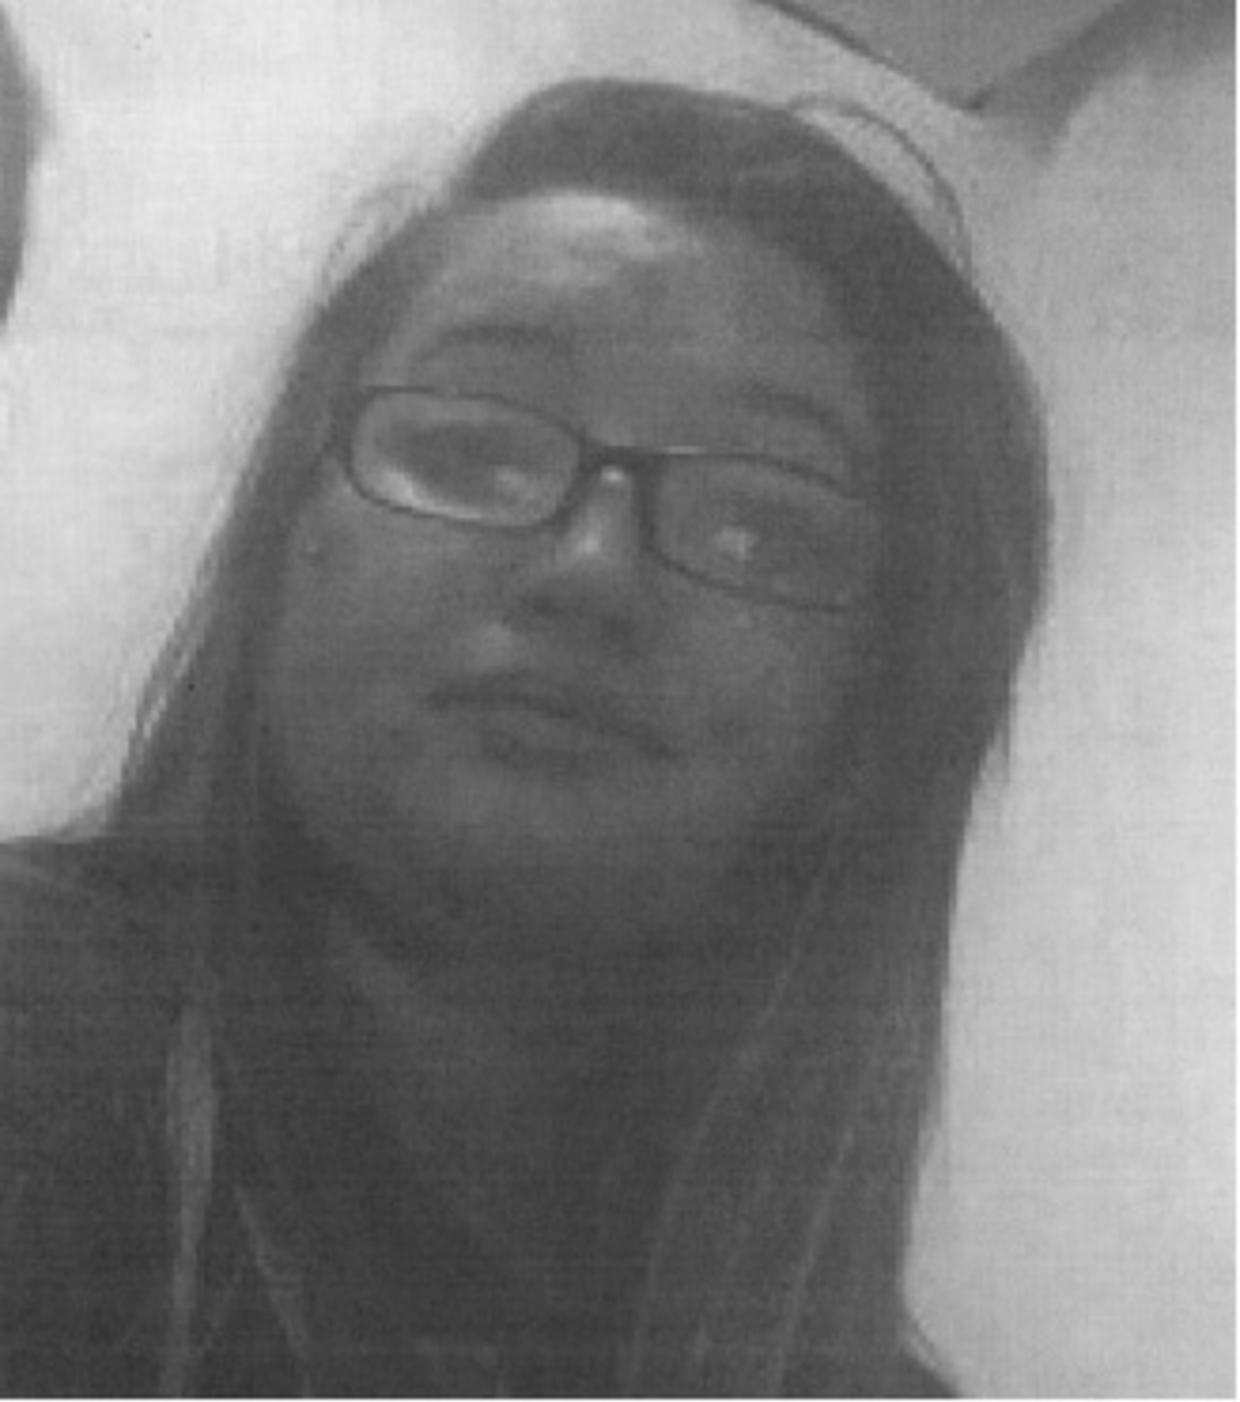 15 Year Old Girl Reported Missing From Albany Park Cbs Chicago 2897